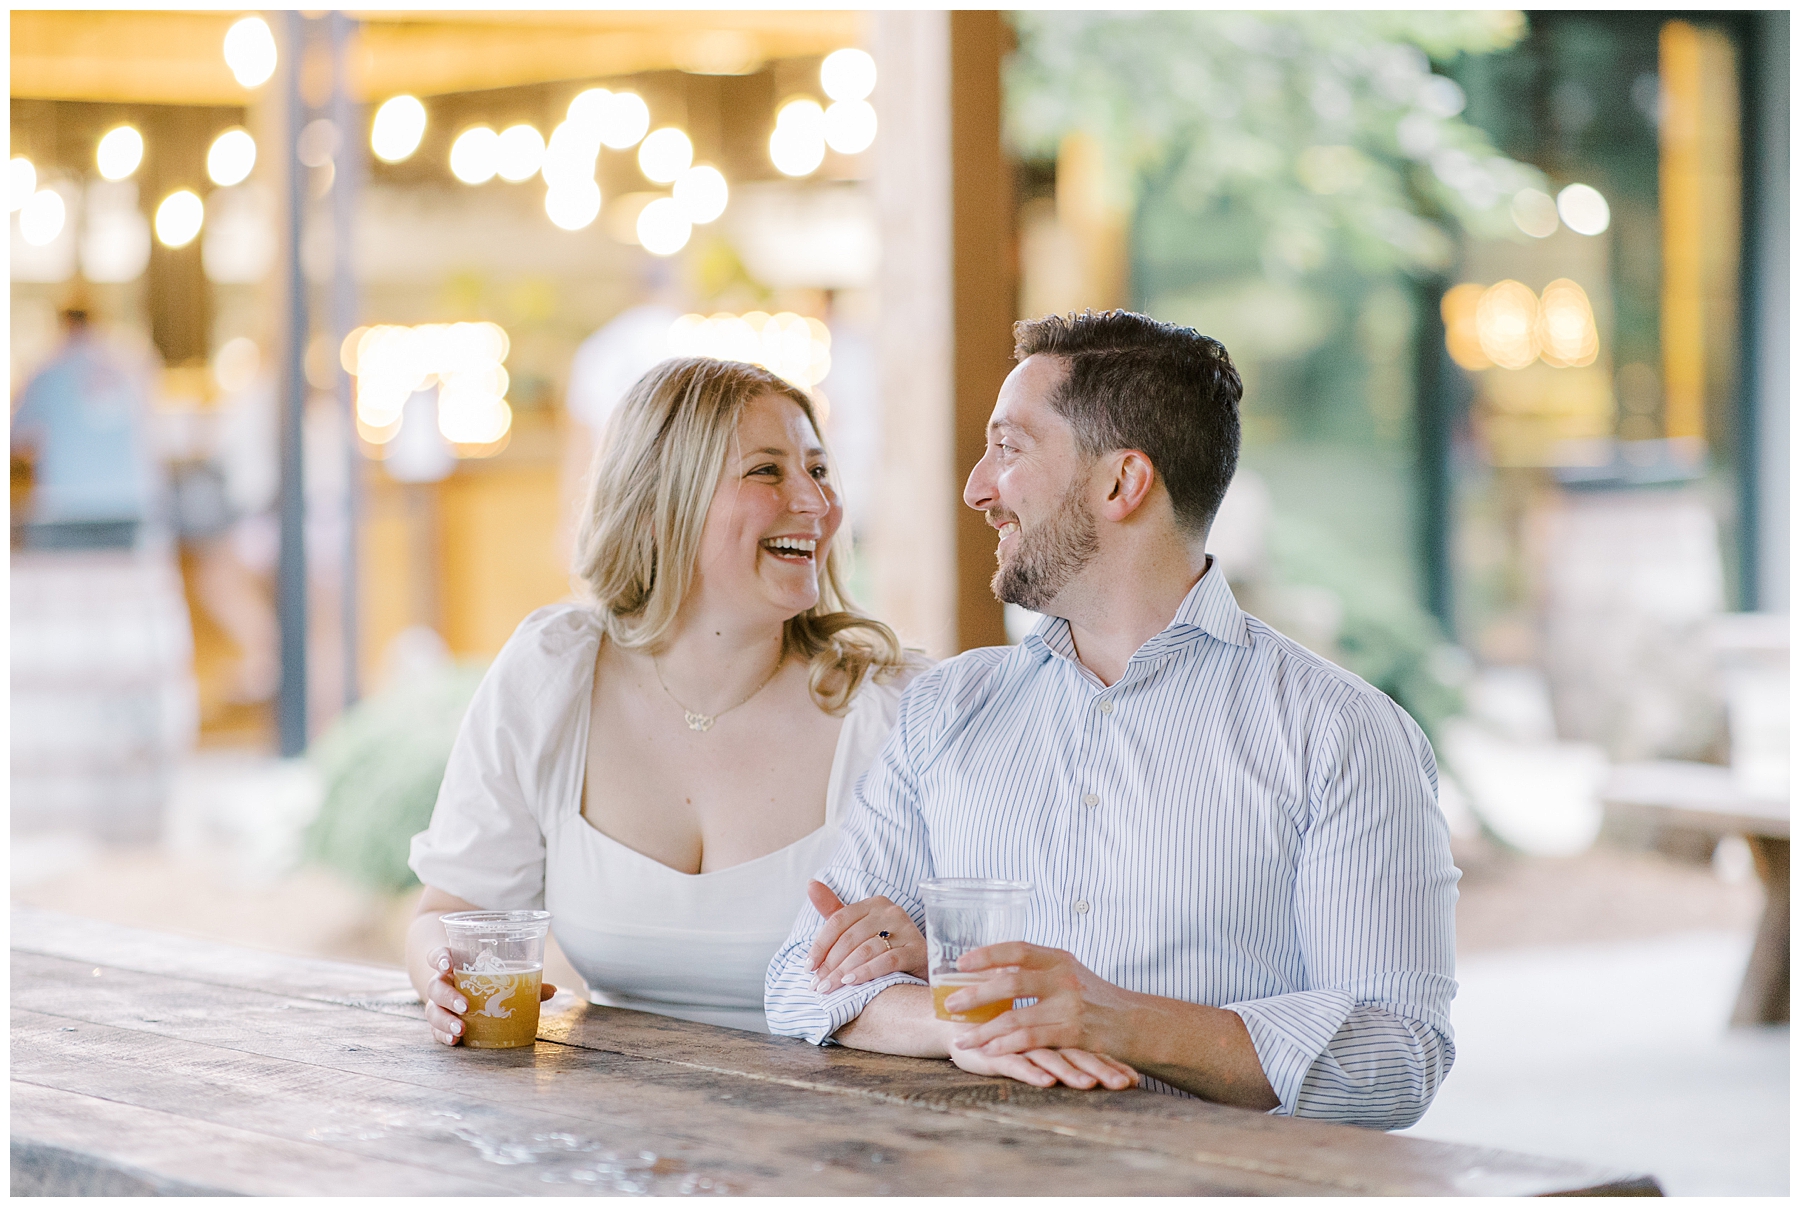 Intimate Engagement Session at Tree House Brewing Company